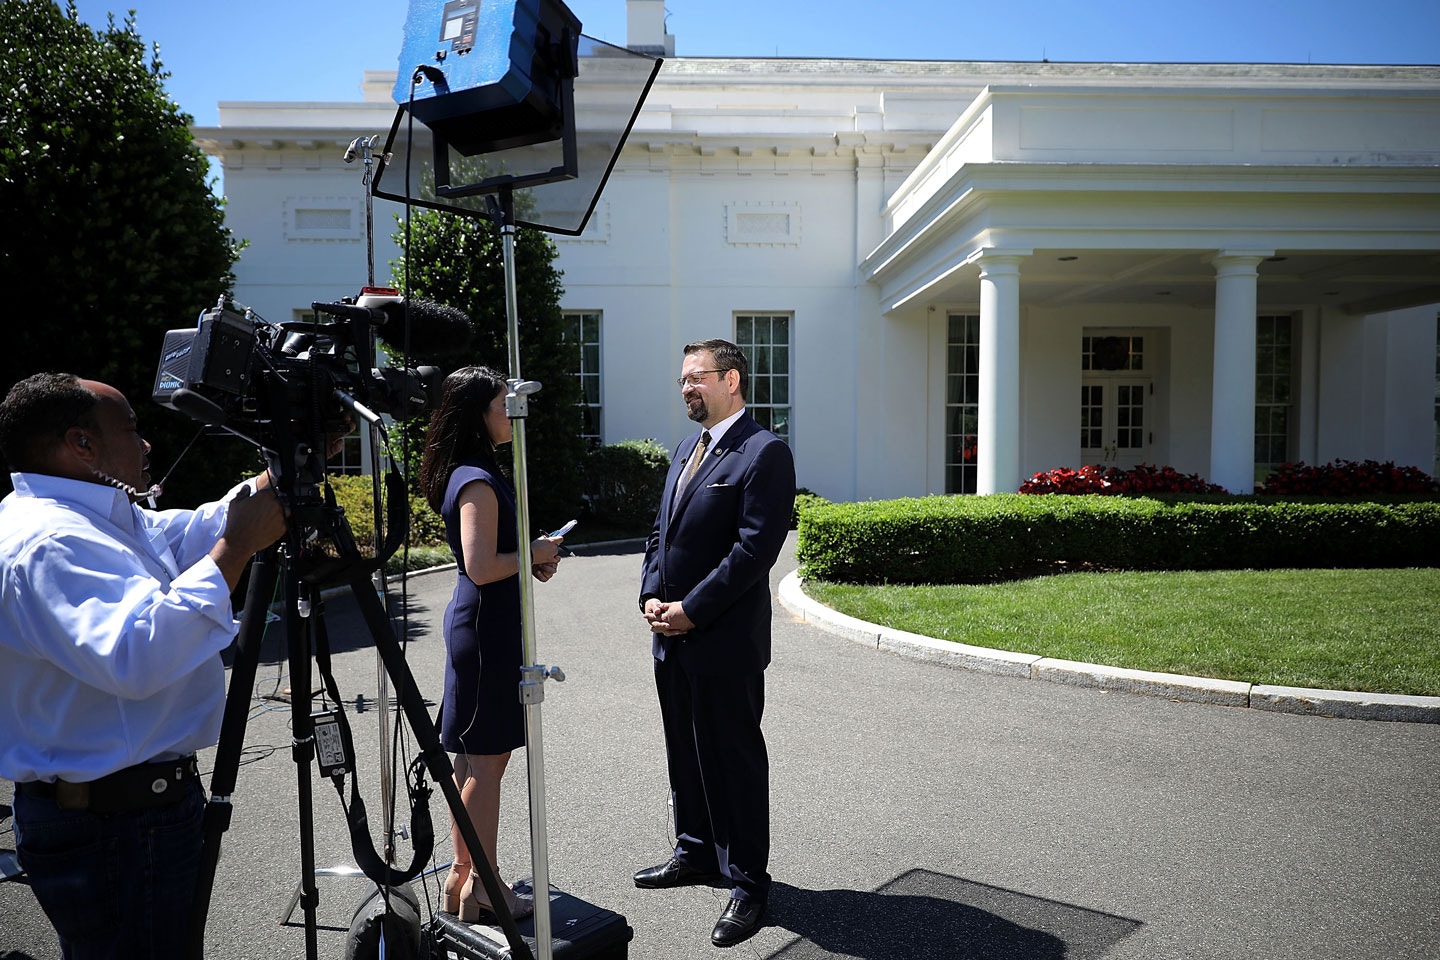 WASHINGTON, DC - JUNE 09:  White House Deputy Assistant To The President Sebastian Gorka participates in a television interview outside the White House West Wing June 9, 2017 in Washington, DC. A former national security editor for Breitbart, Gorka has hard-line stands on Islam and terrorism and past involvement in right-wing Hungarian politics.  (Photo by Chip Somodevilla/Getty Images)